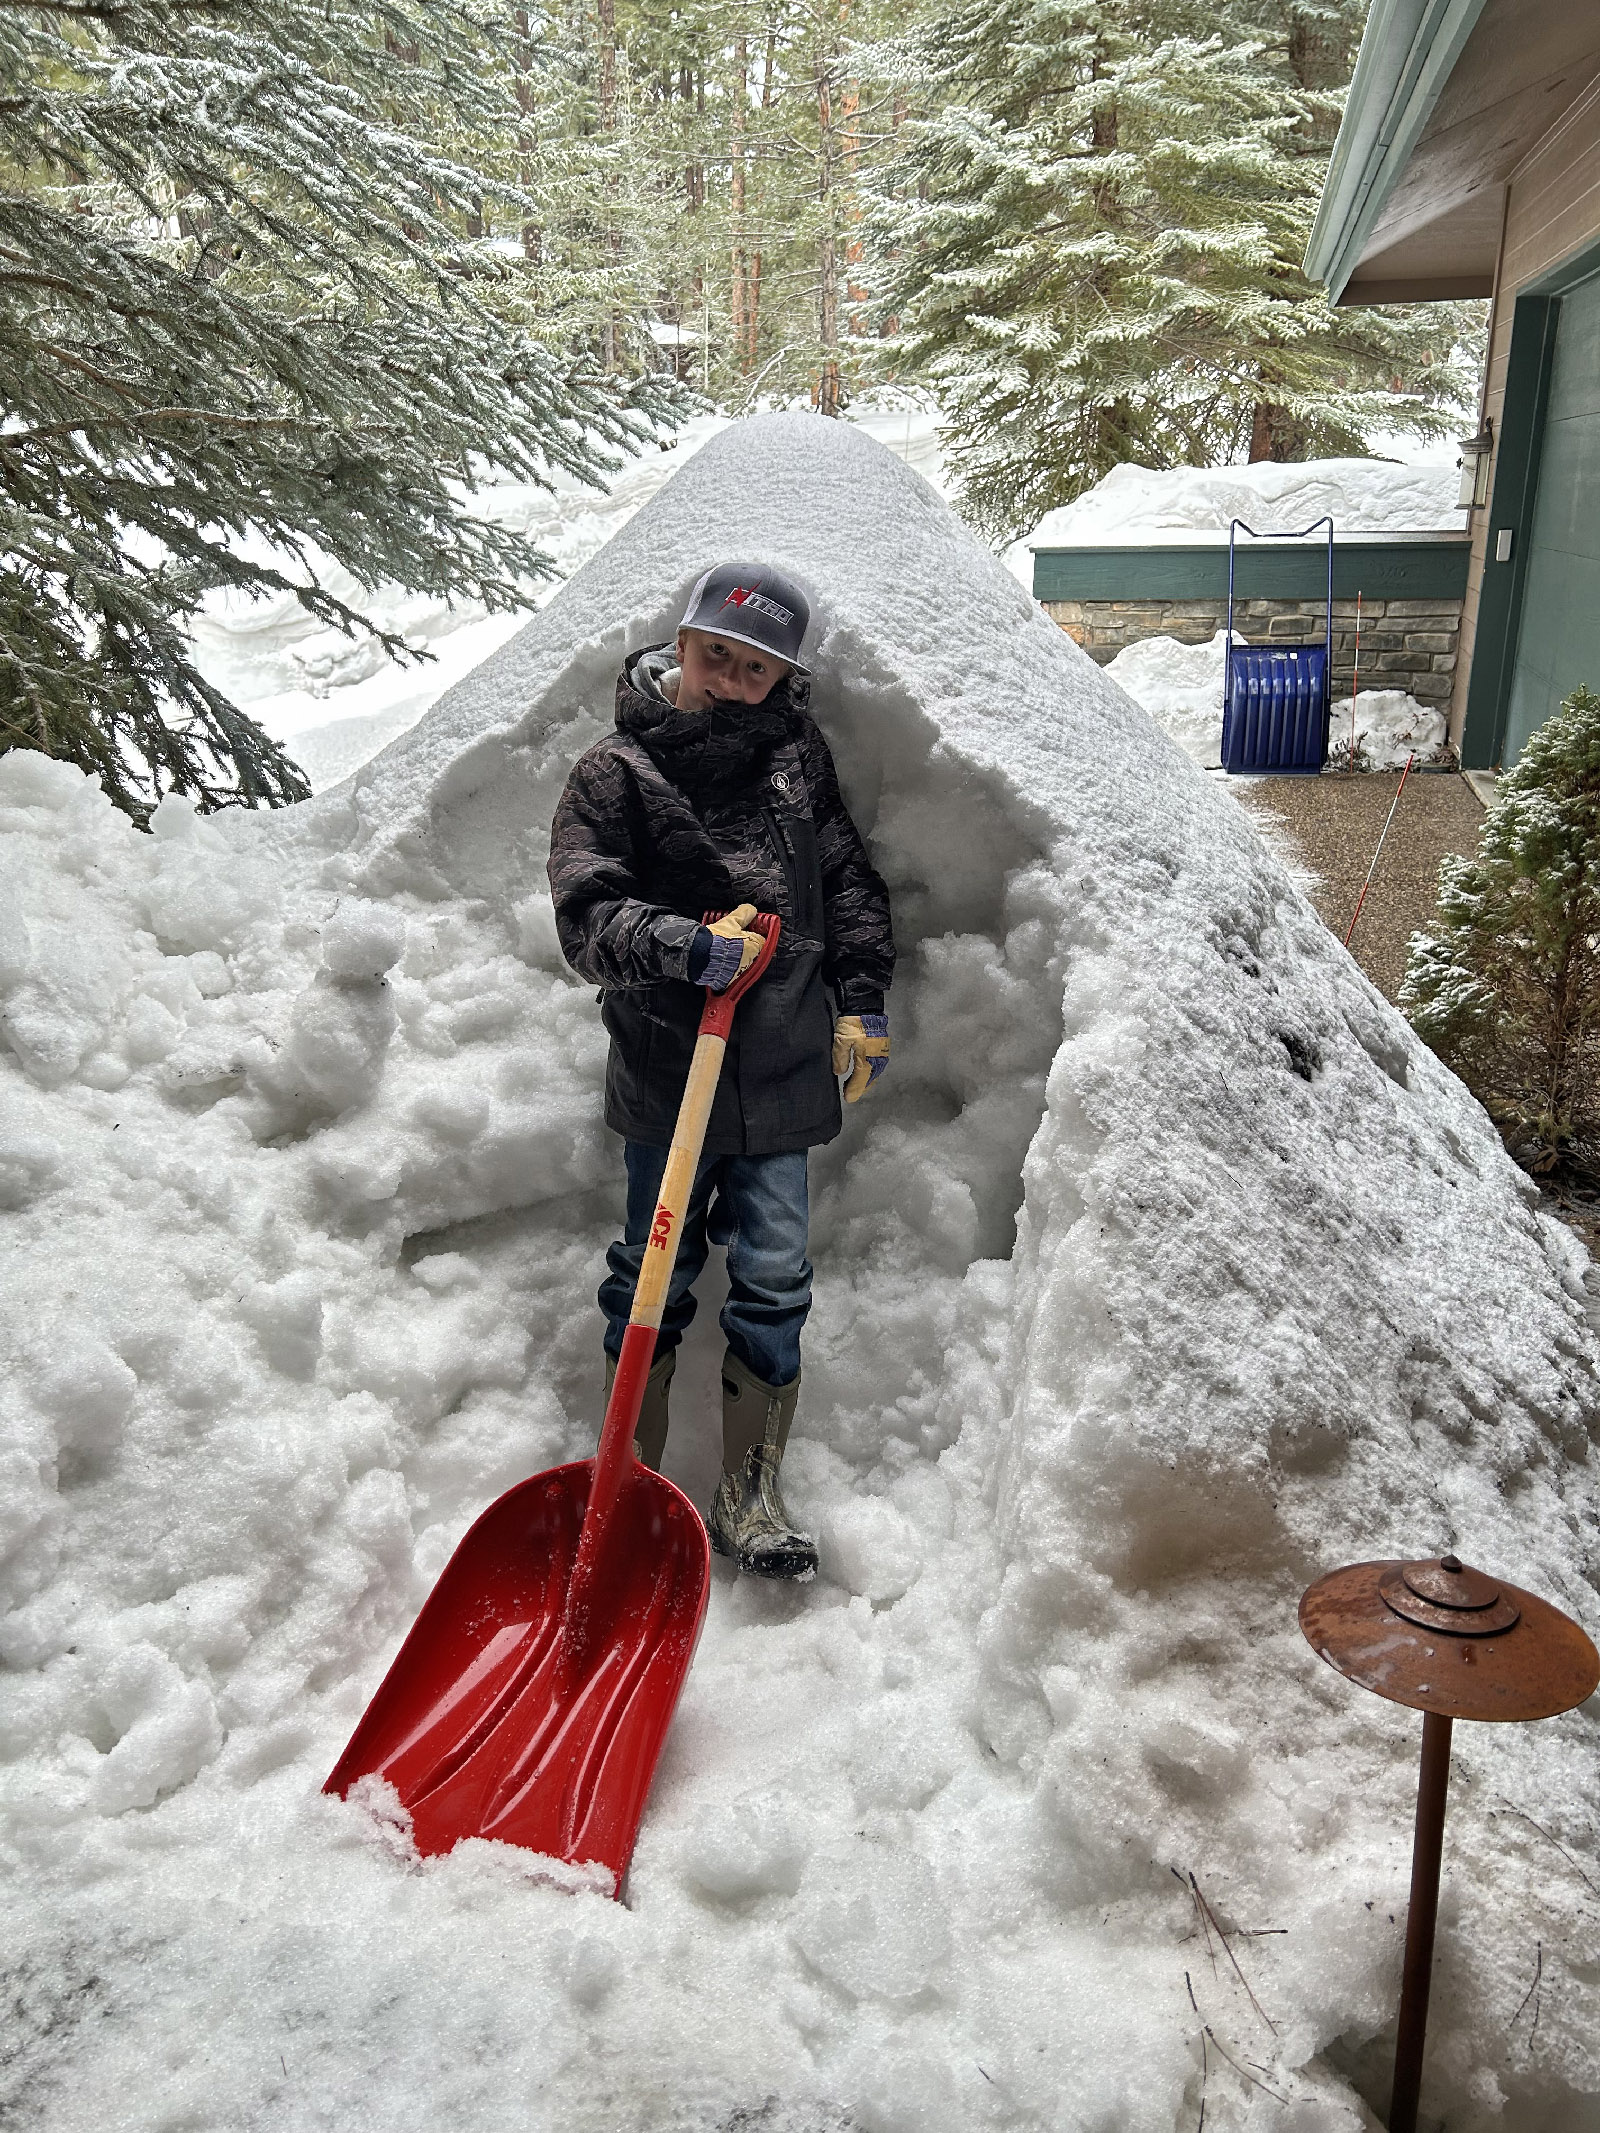 Shoveling snow from roofs